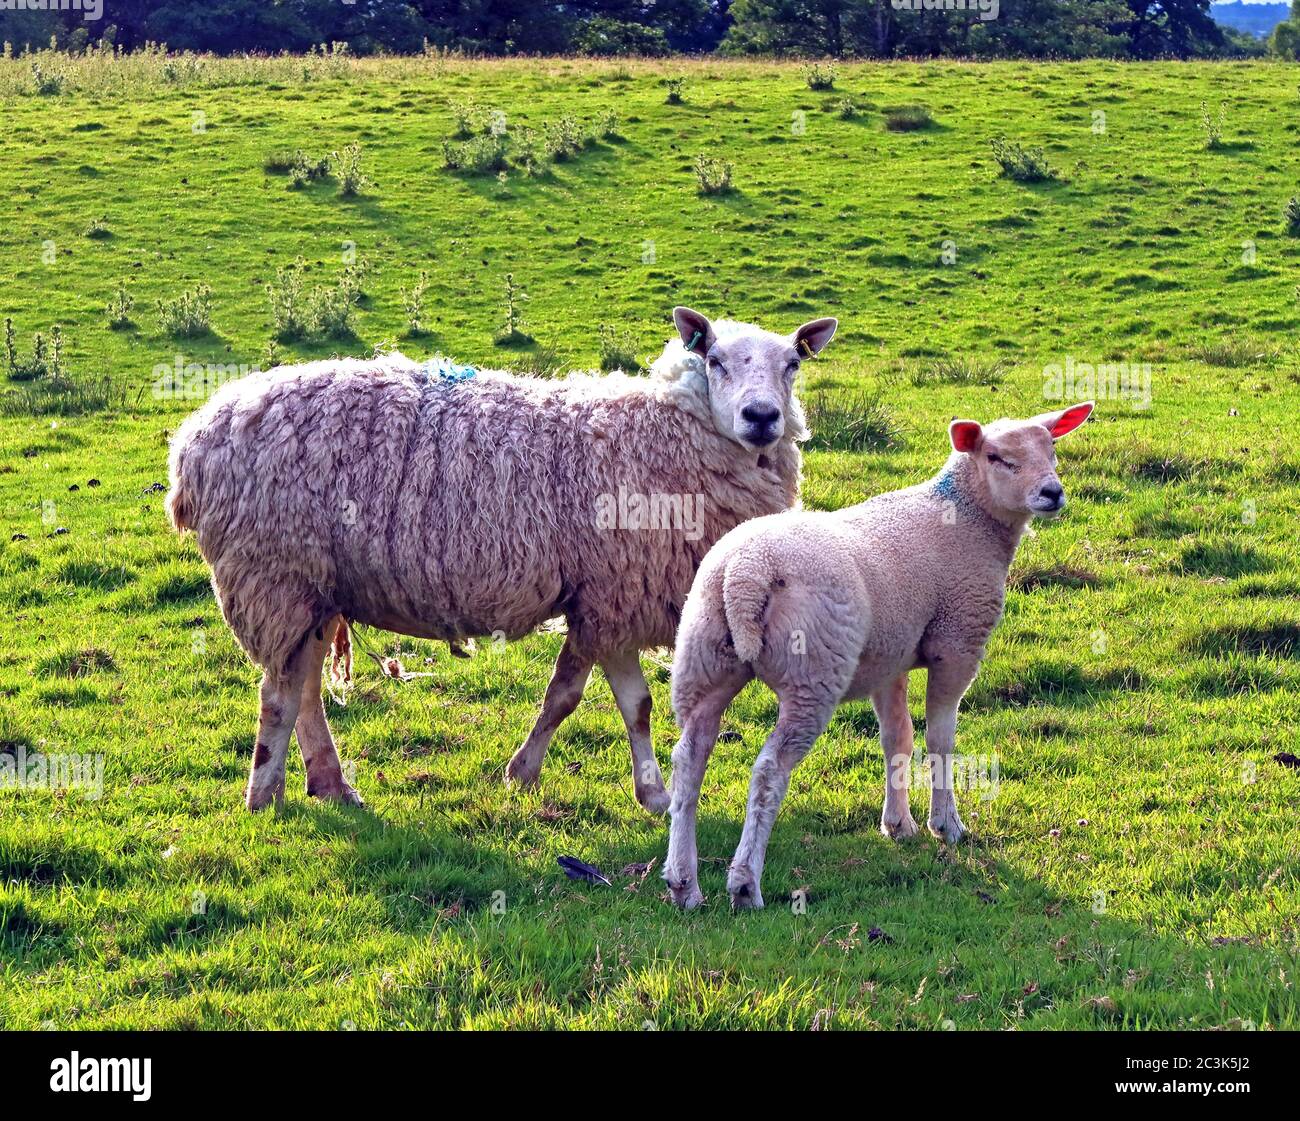 Sheep with a spring lamb, farmers field, Cheshire, England, UK Stock Photo